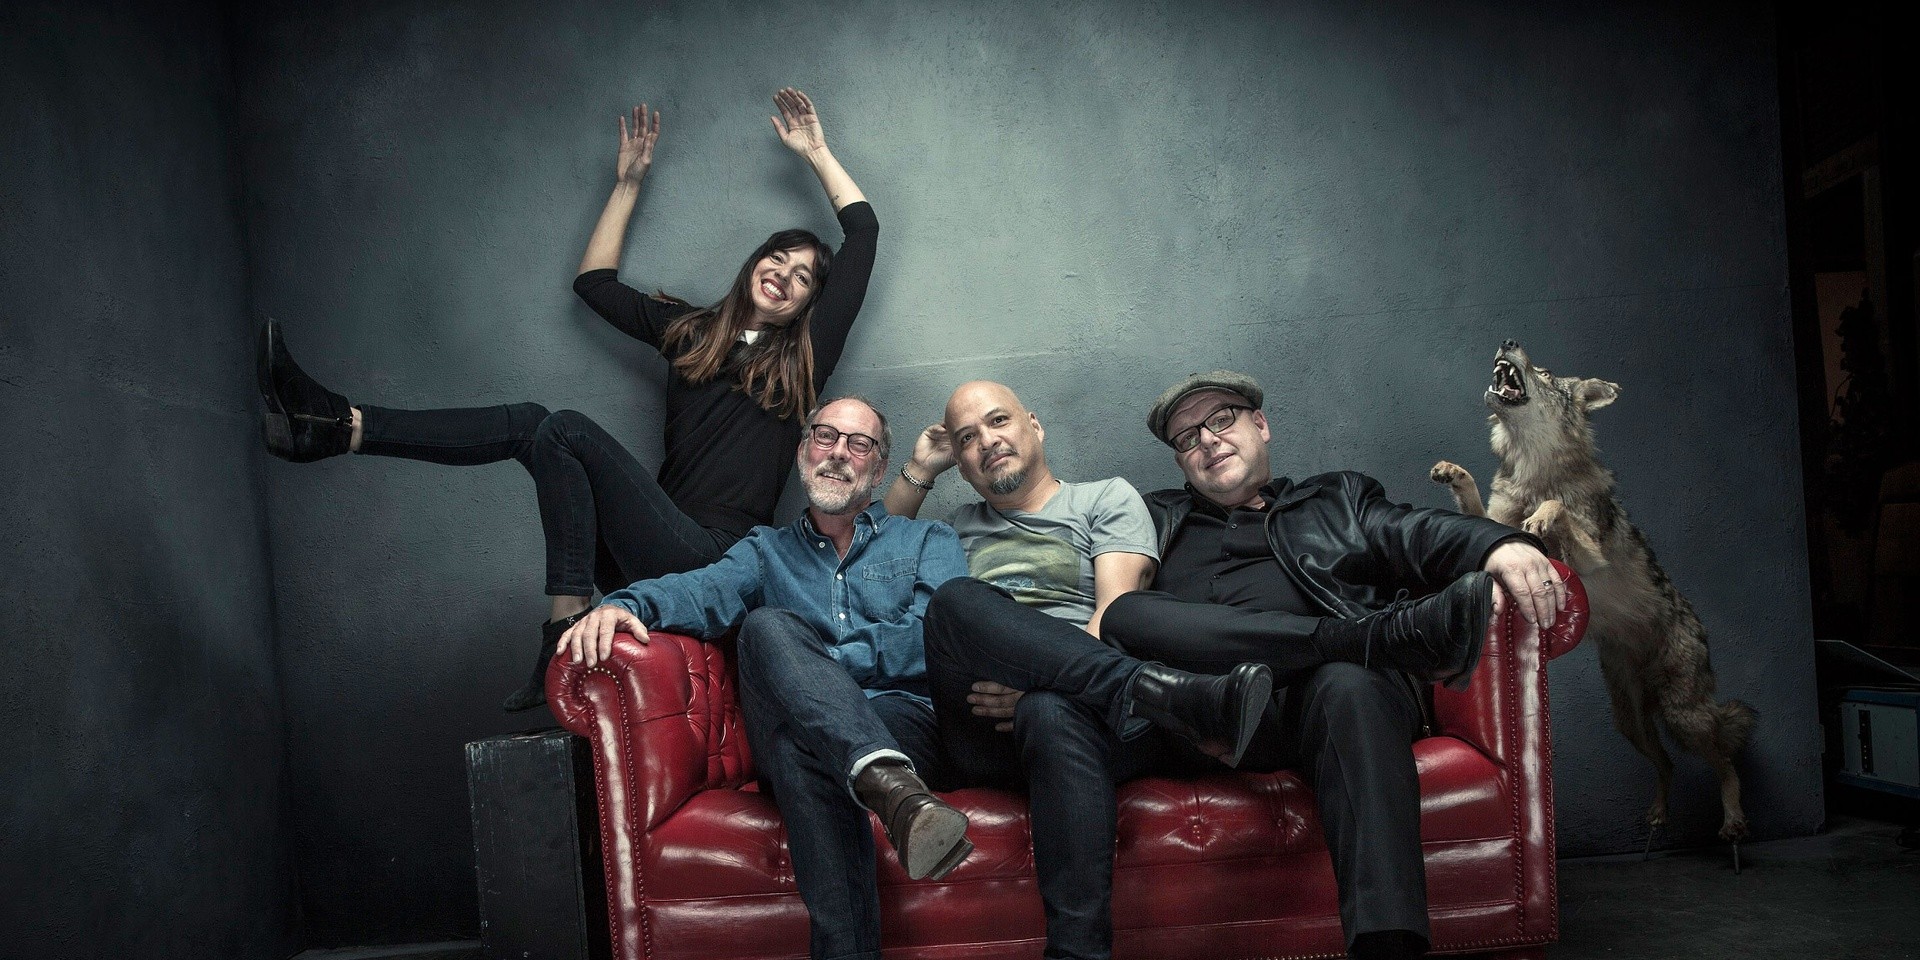 Pixies announce upcoming album, release new single ‘On Graveyard Hill’ – listen